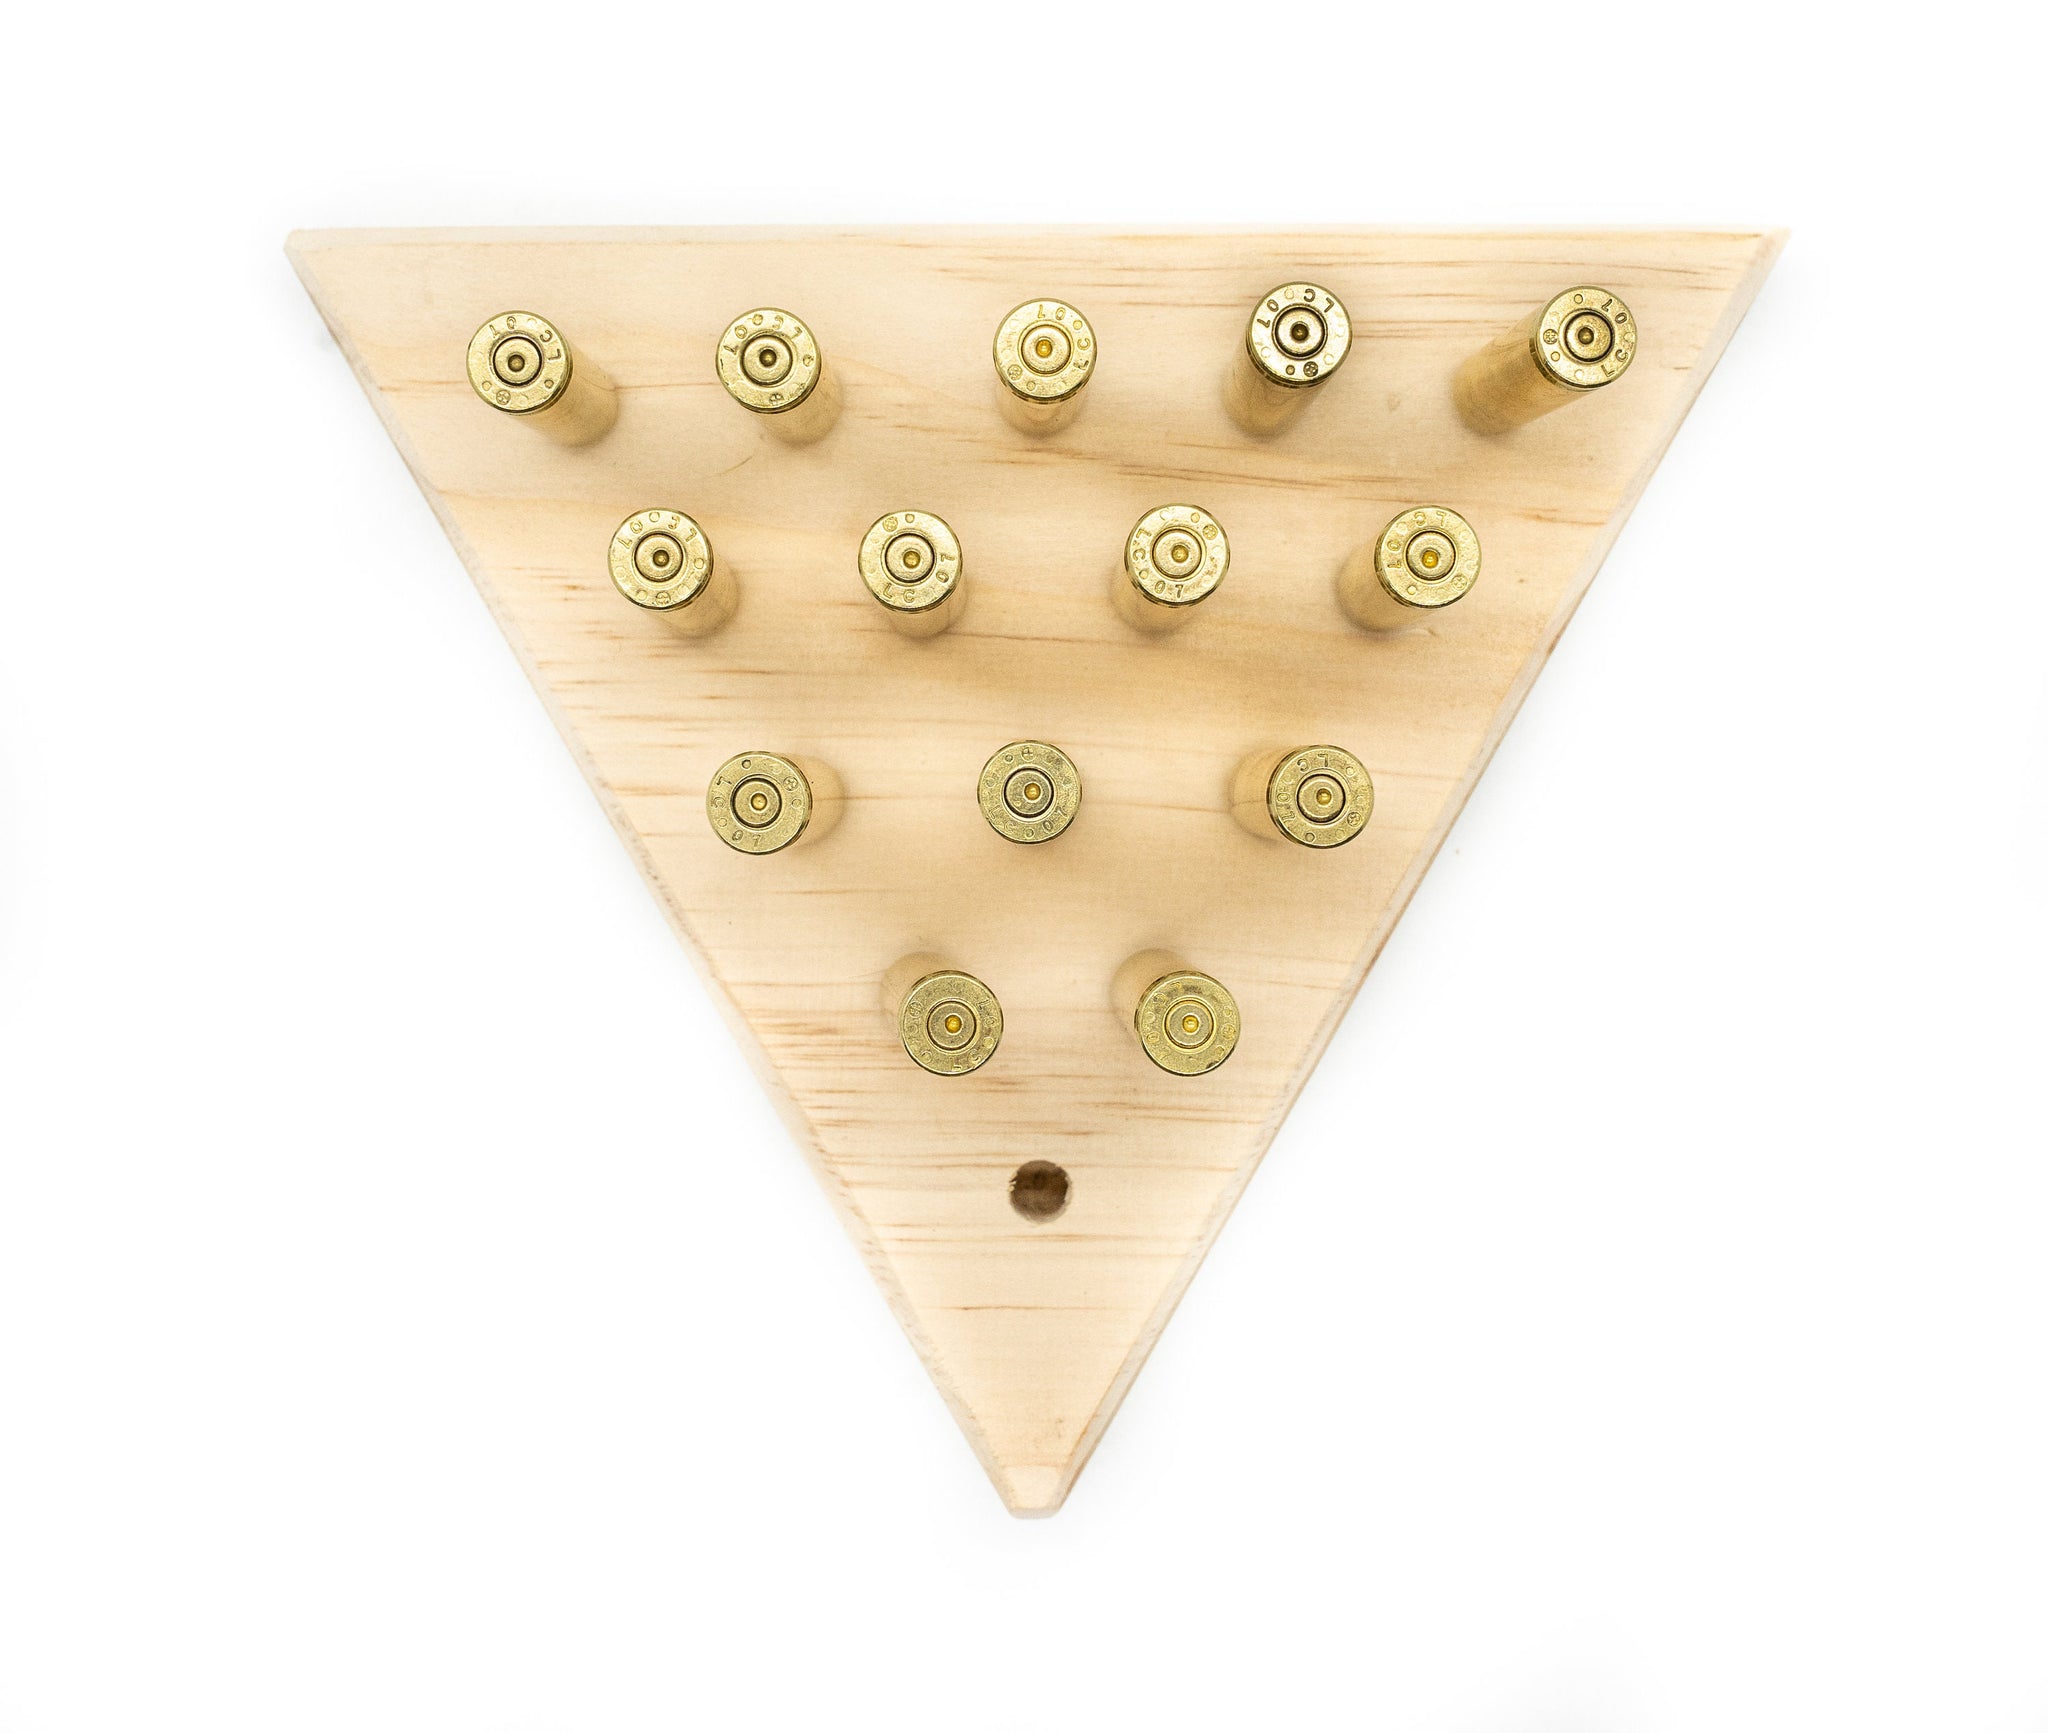 Tricky Triangle - Peg Solitaire - Bullet Peg Wooden Kids Game Puzzle - -  Crooked Creek Antler Art